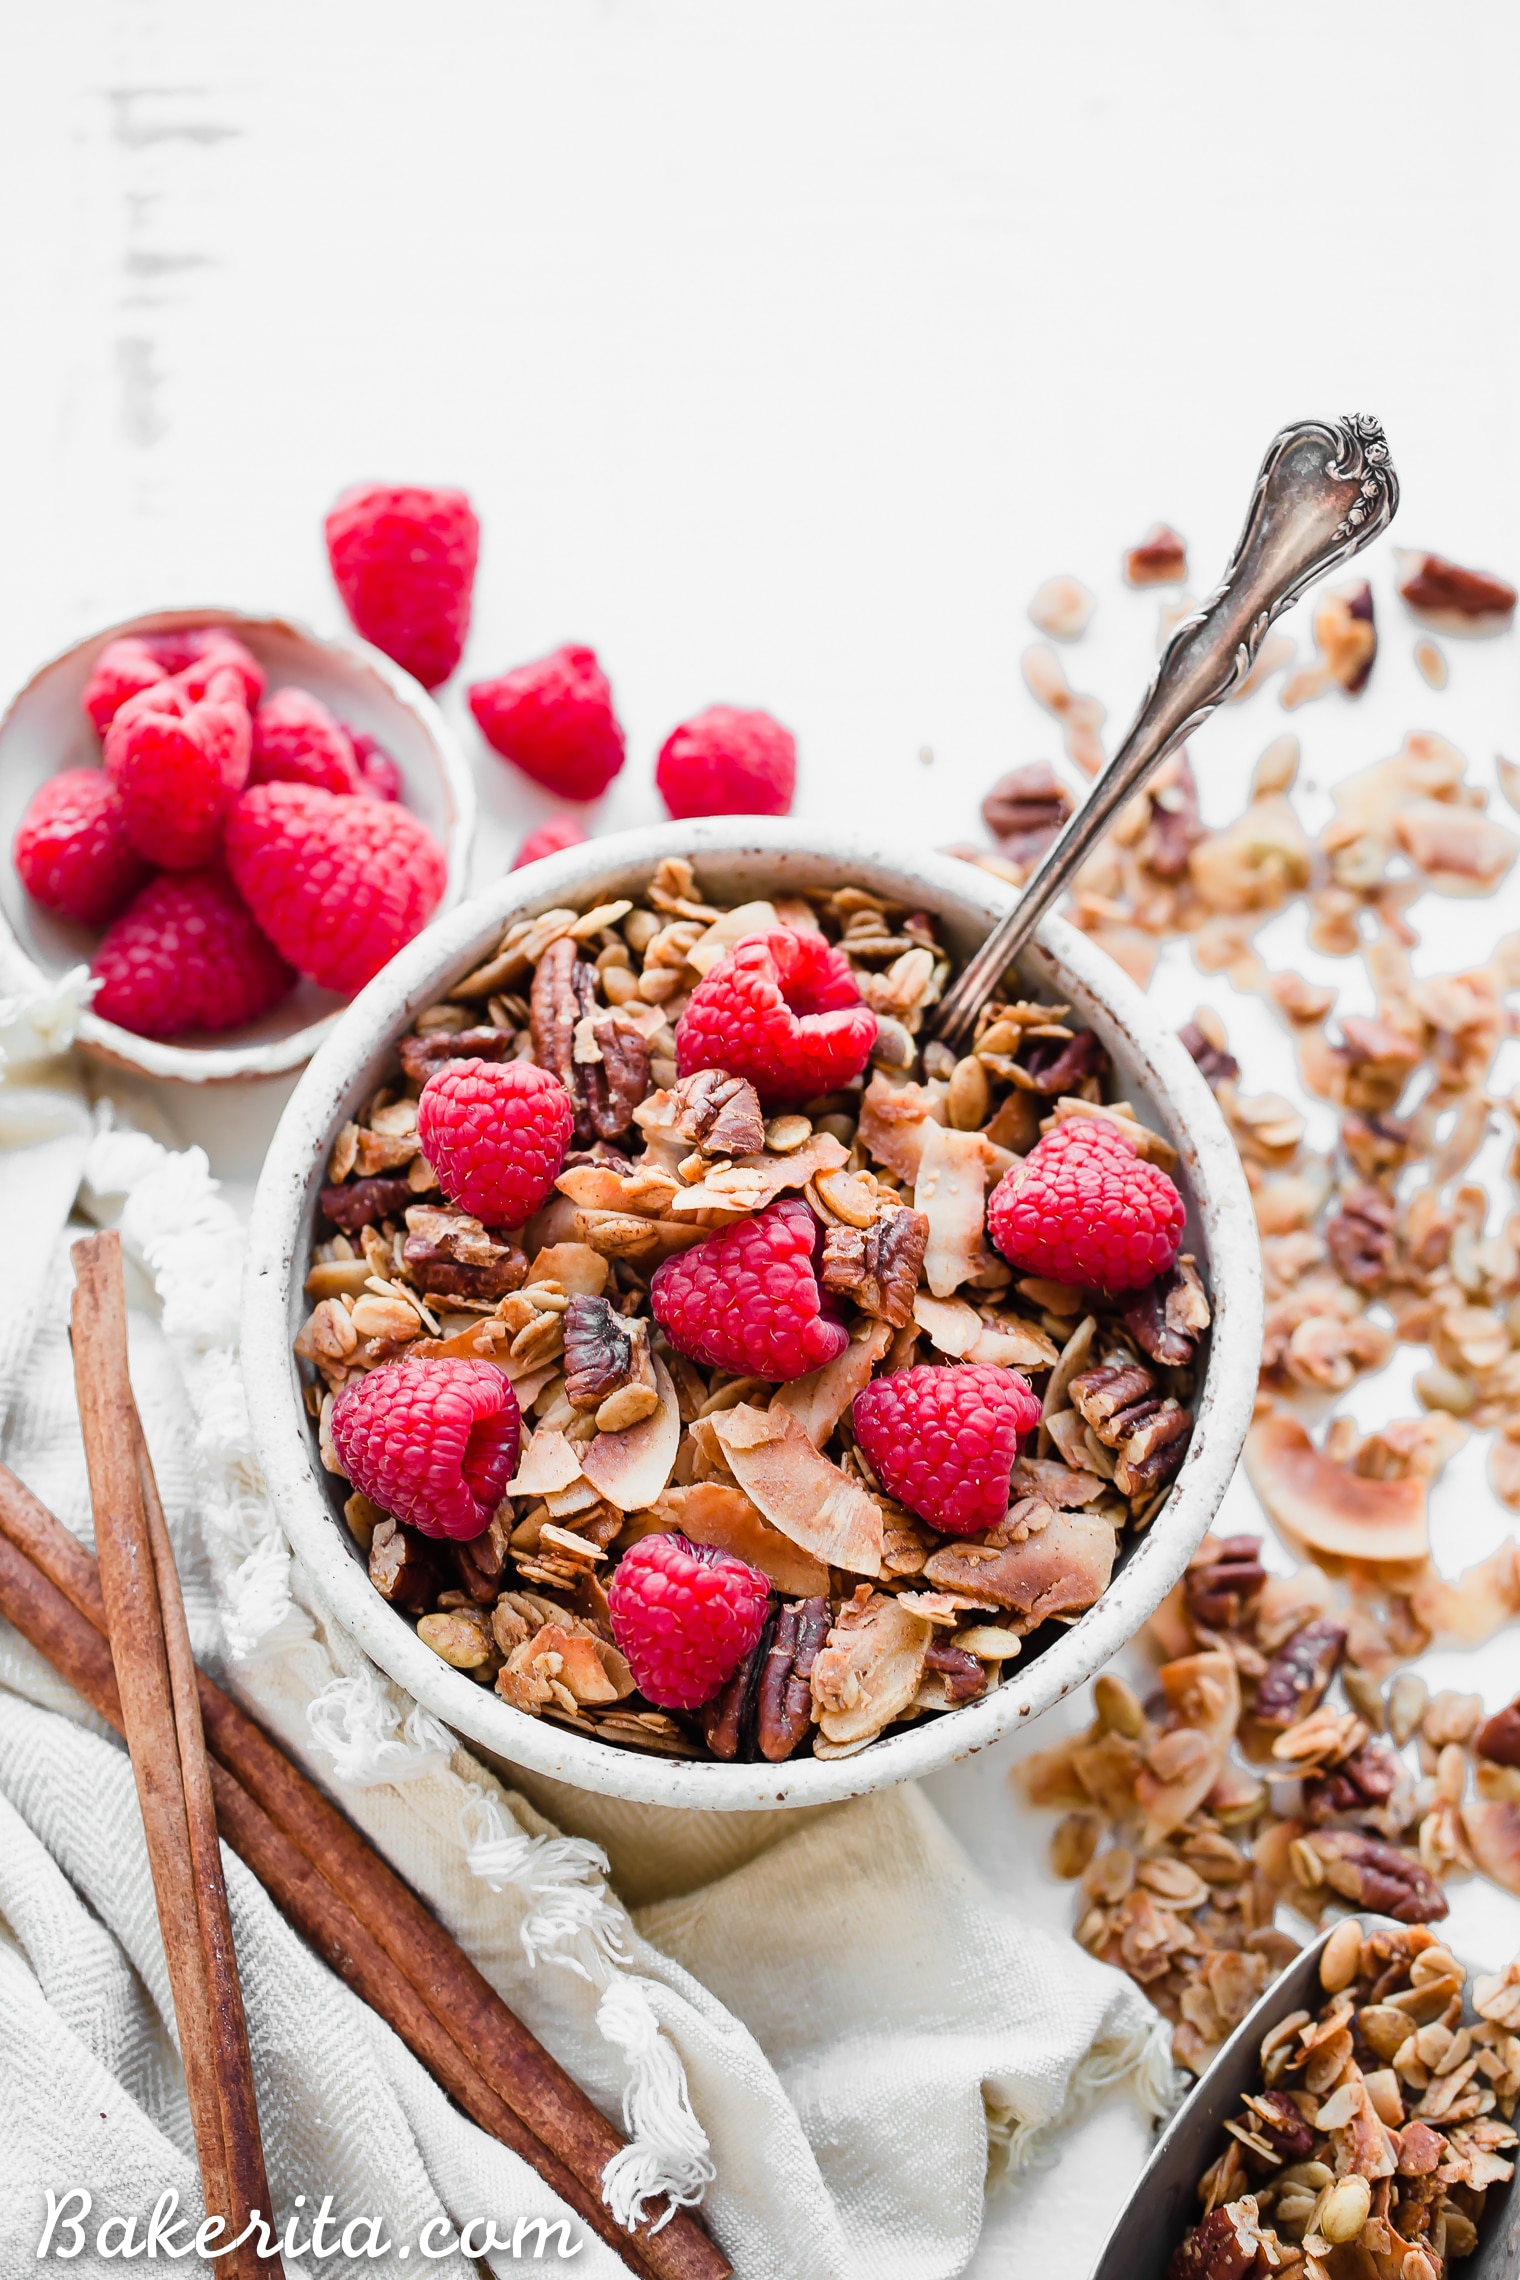 This Coconut Pecan Granola is a flavorful, crunchy, and just lightly sweetened with maple syrup. This gluten-free, refined sugar-free, and vegan granola is perfect for stirring into your yogurt, serving with milk or eating on its own as a snack.